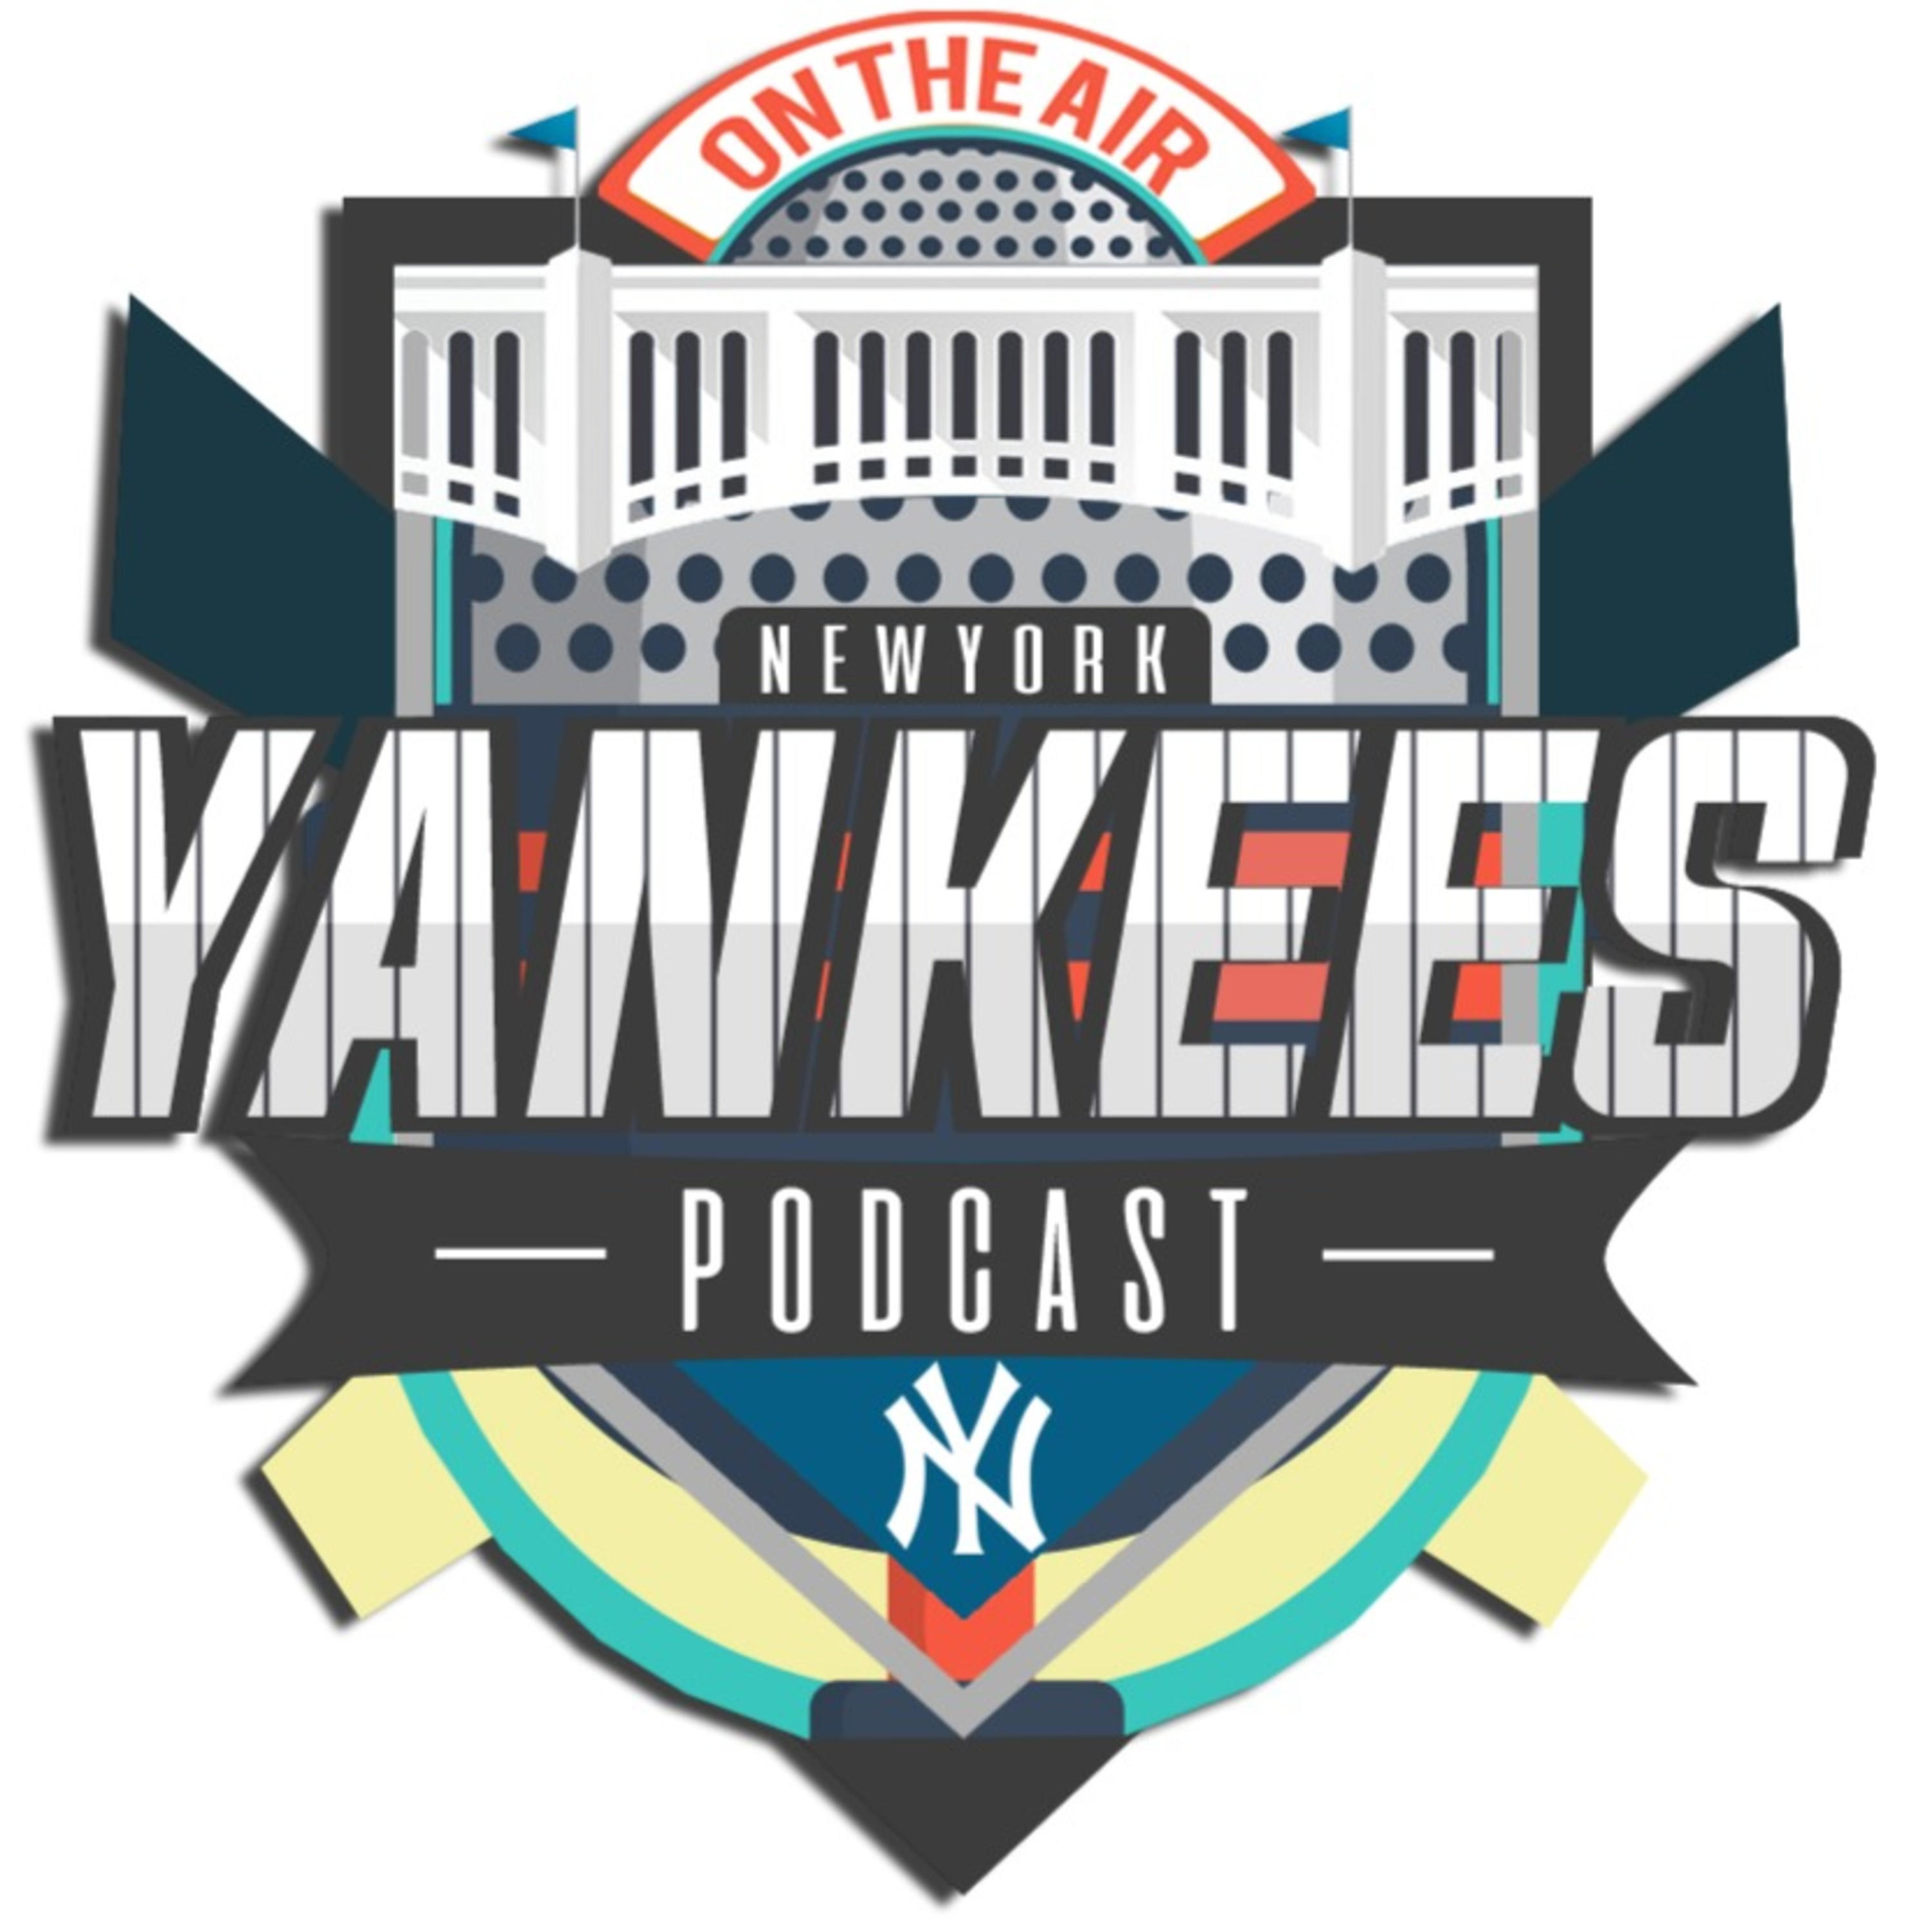 New York Yankees Hungary Podcast - Bé x DS! x Mike - S02EP08